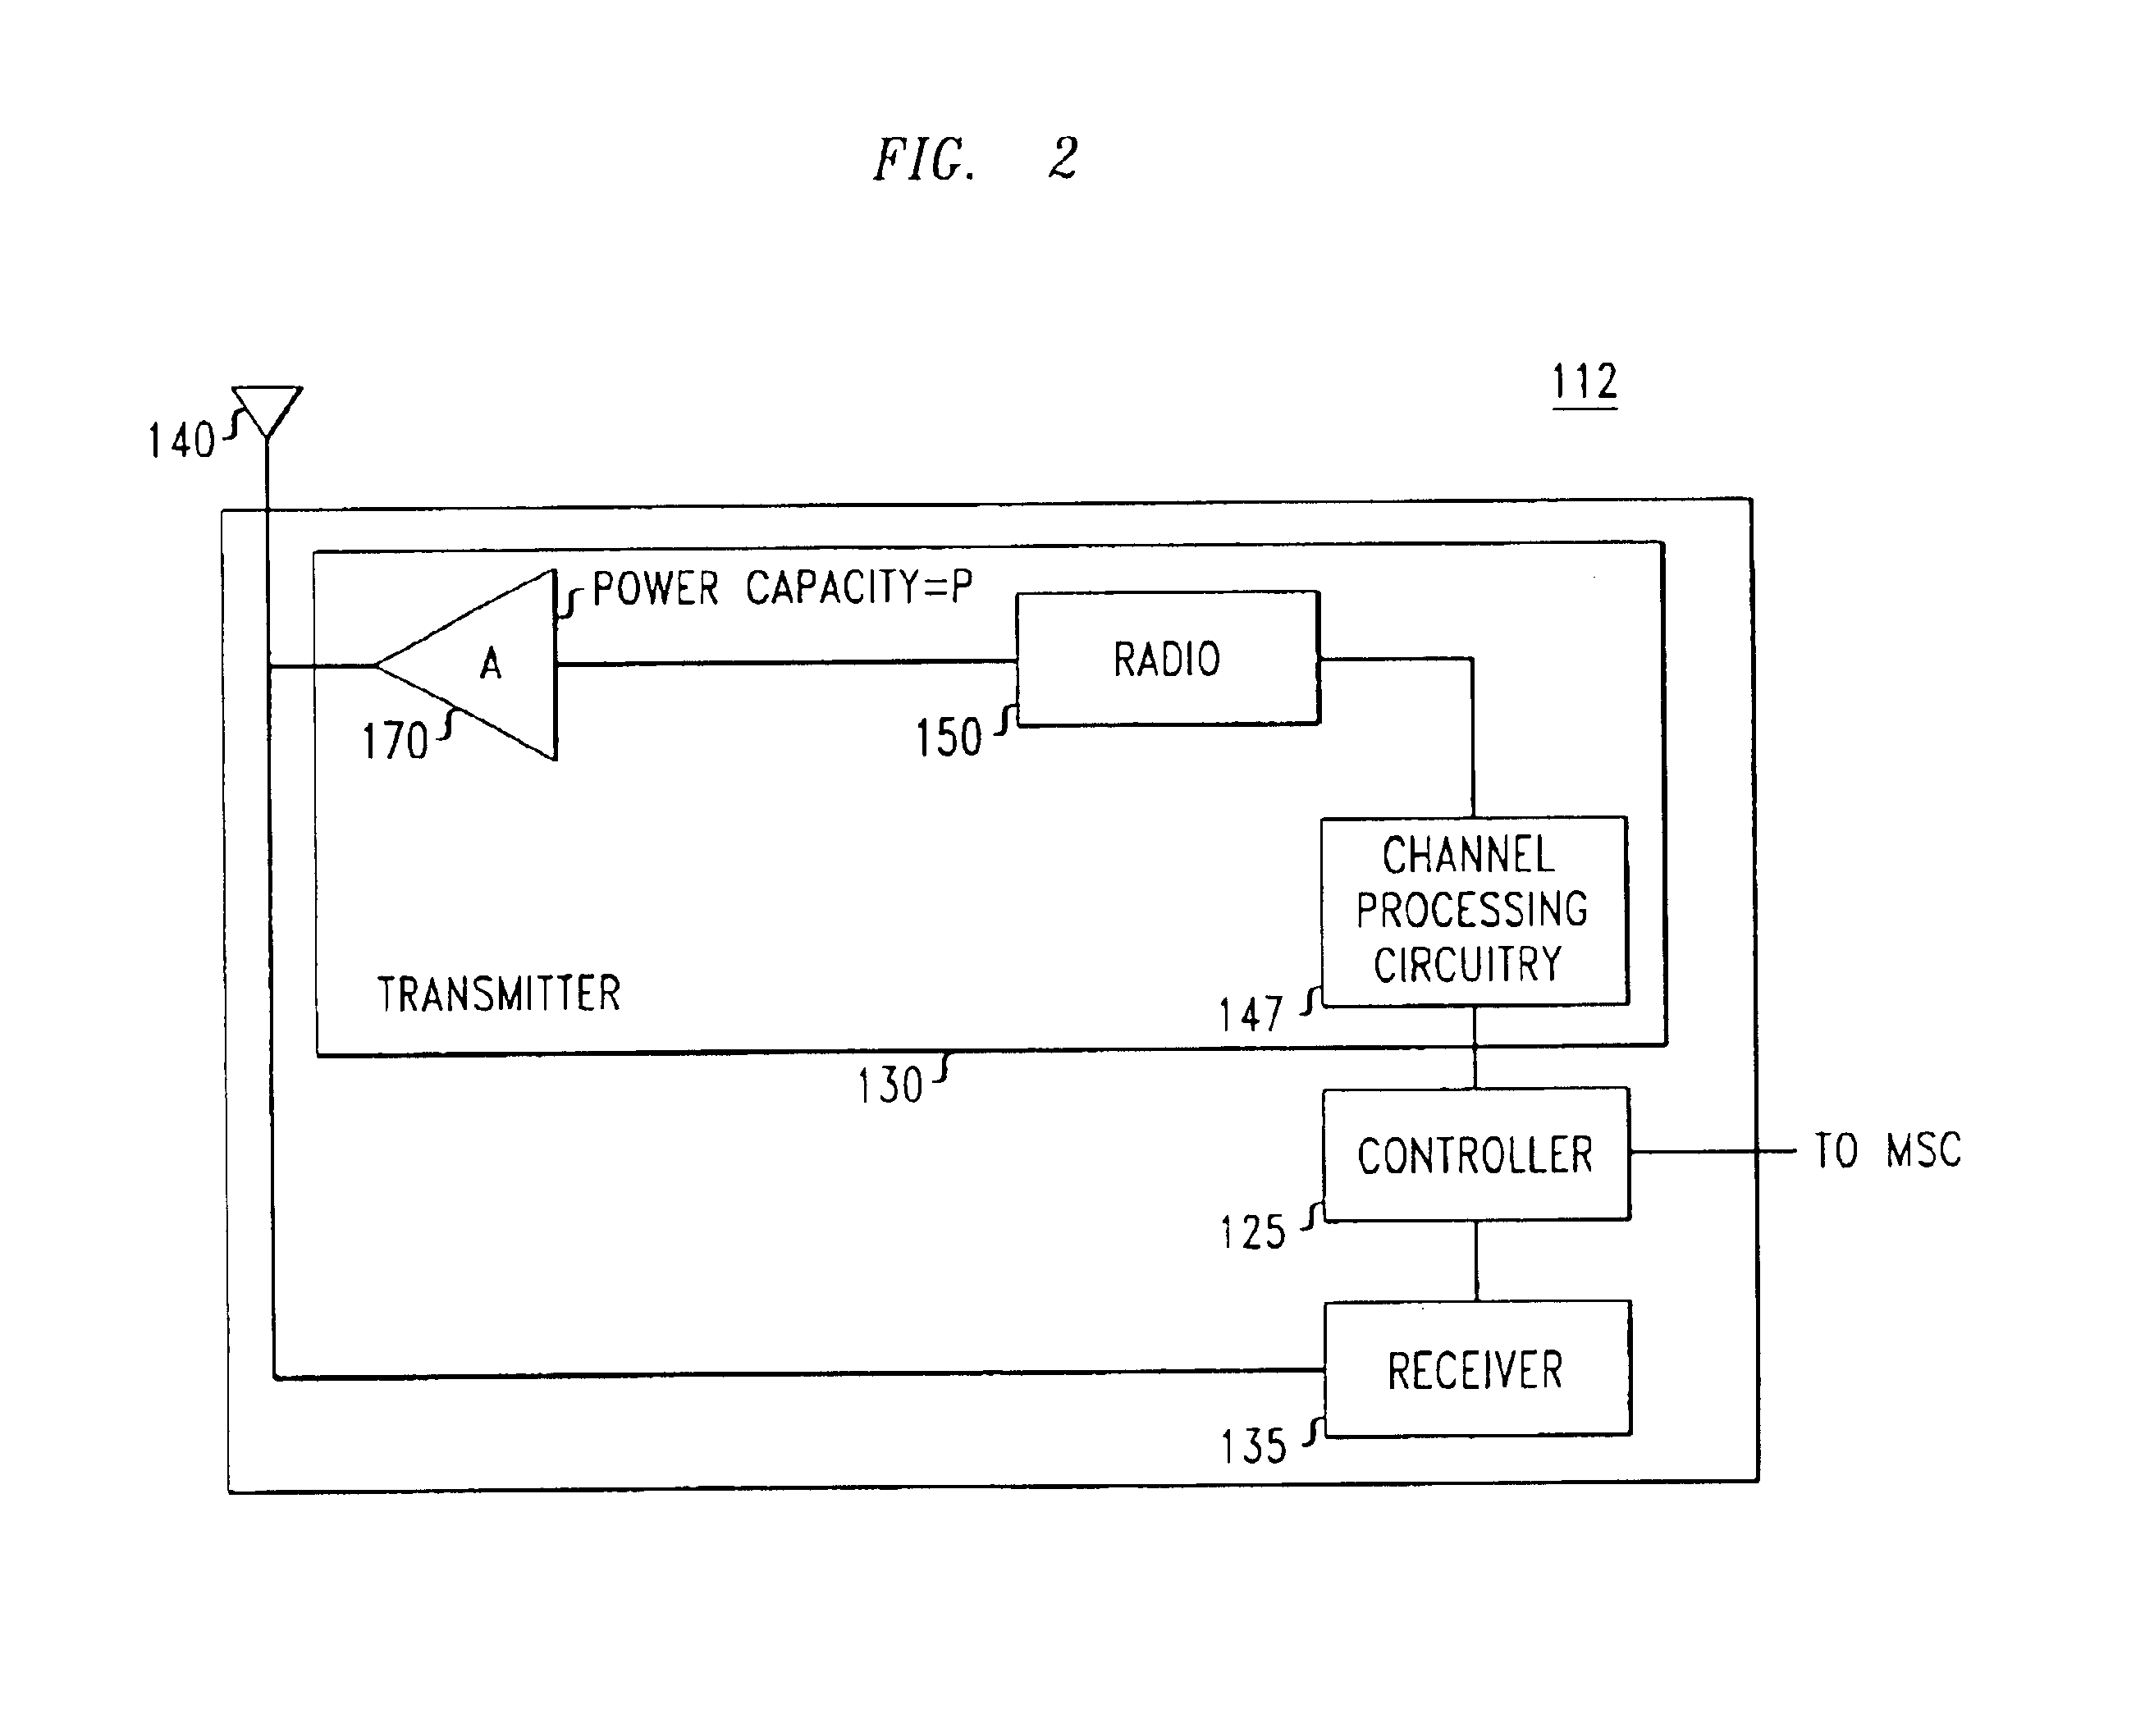 Power amplifier sharing in a wireless communication system with amplifier pre-distortion